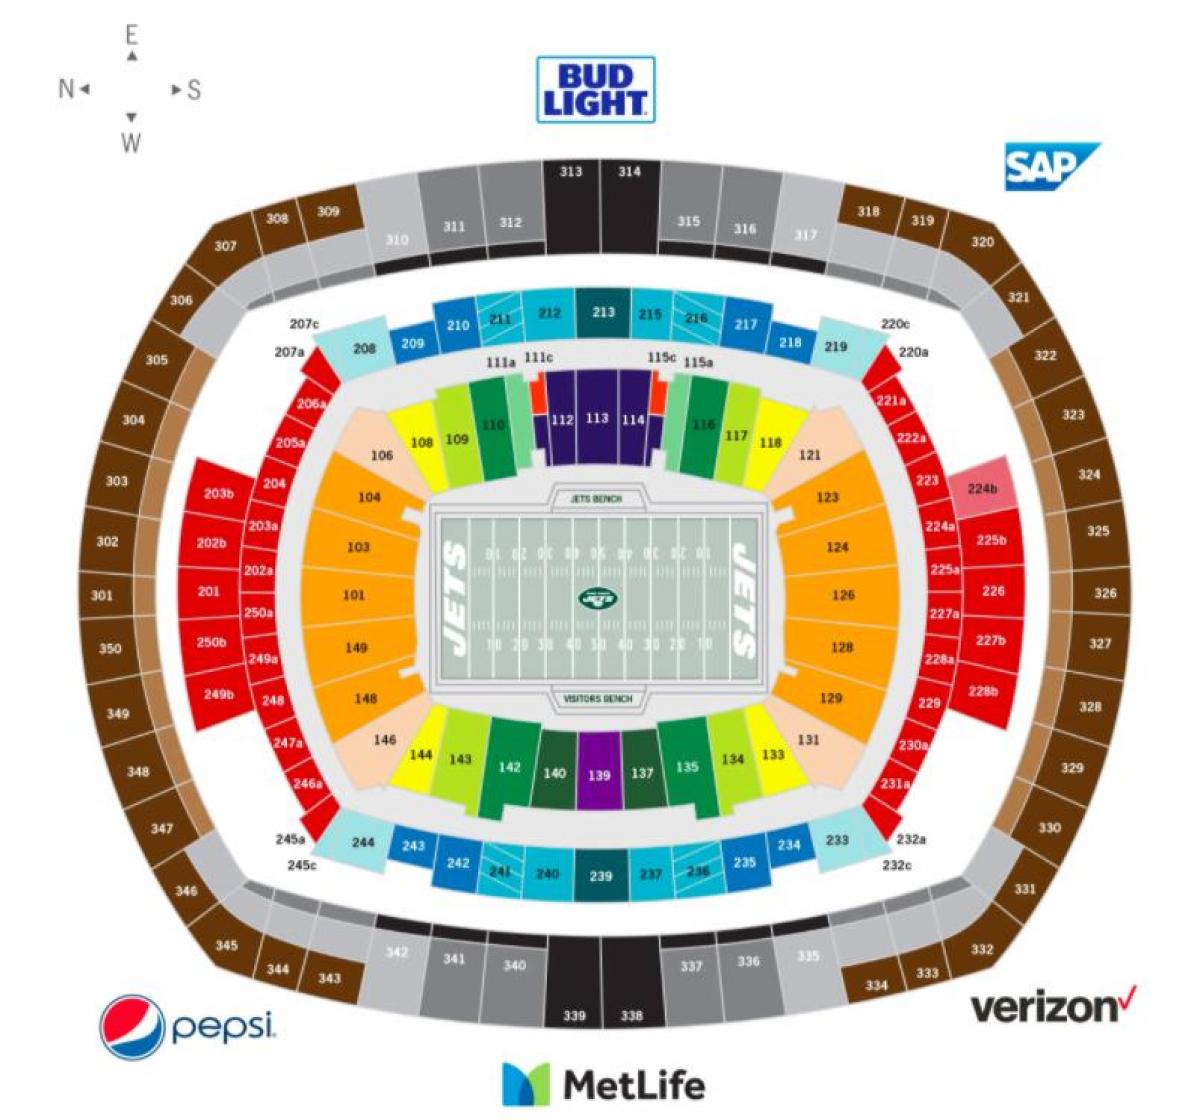 Jets seating map